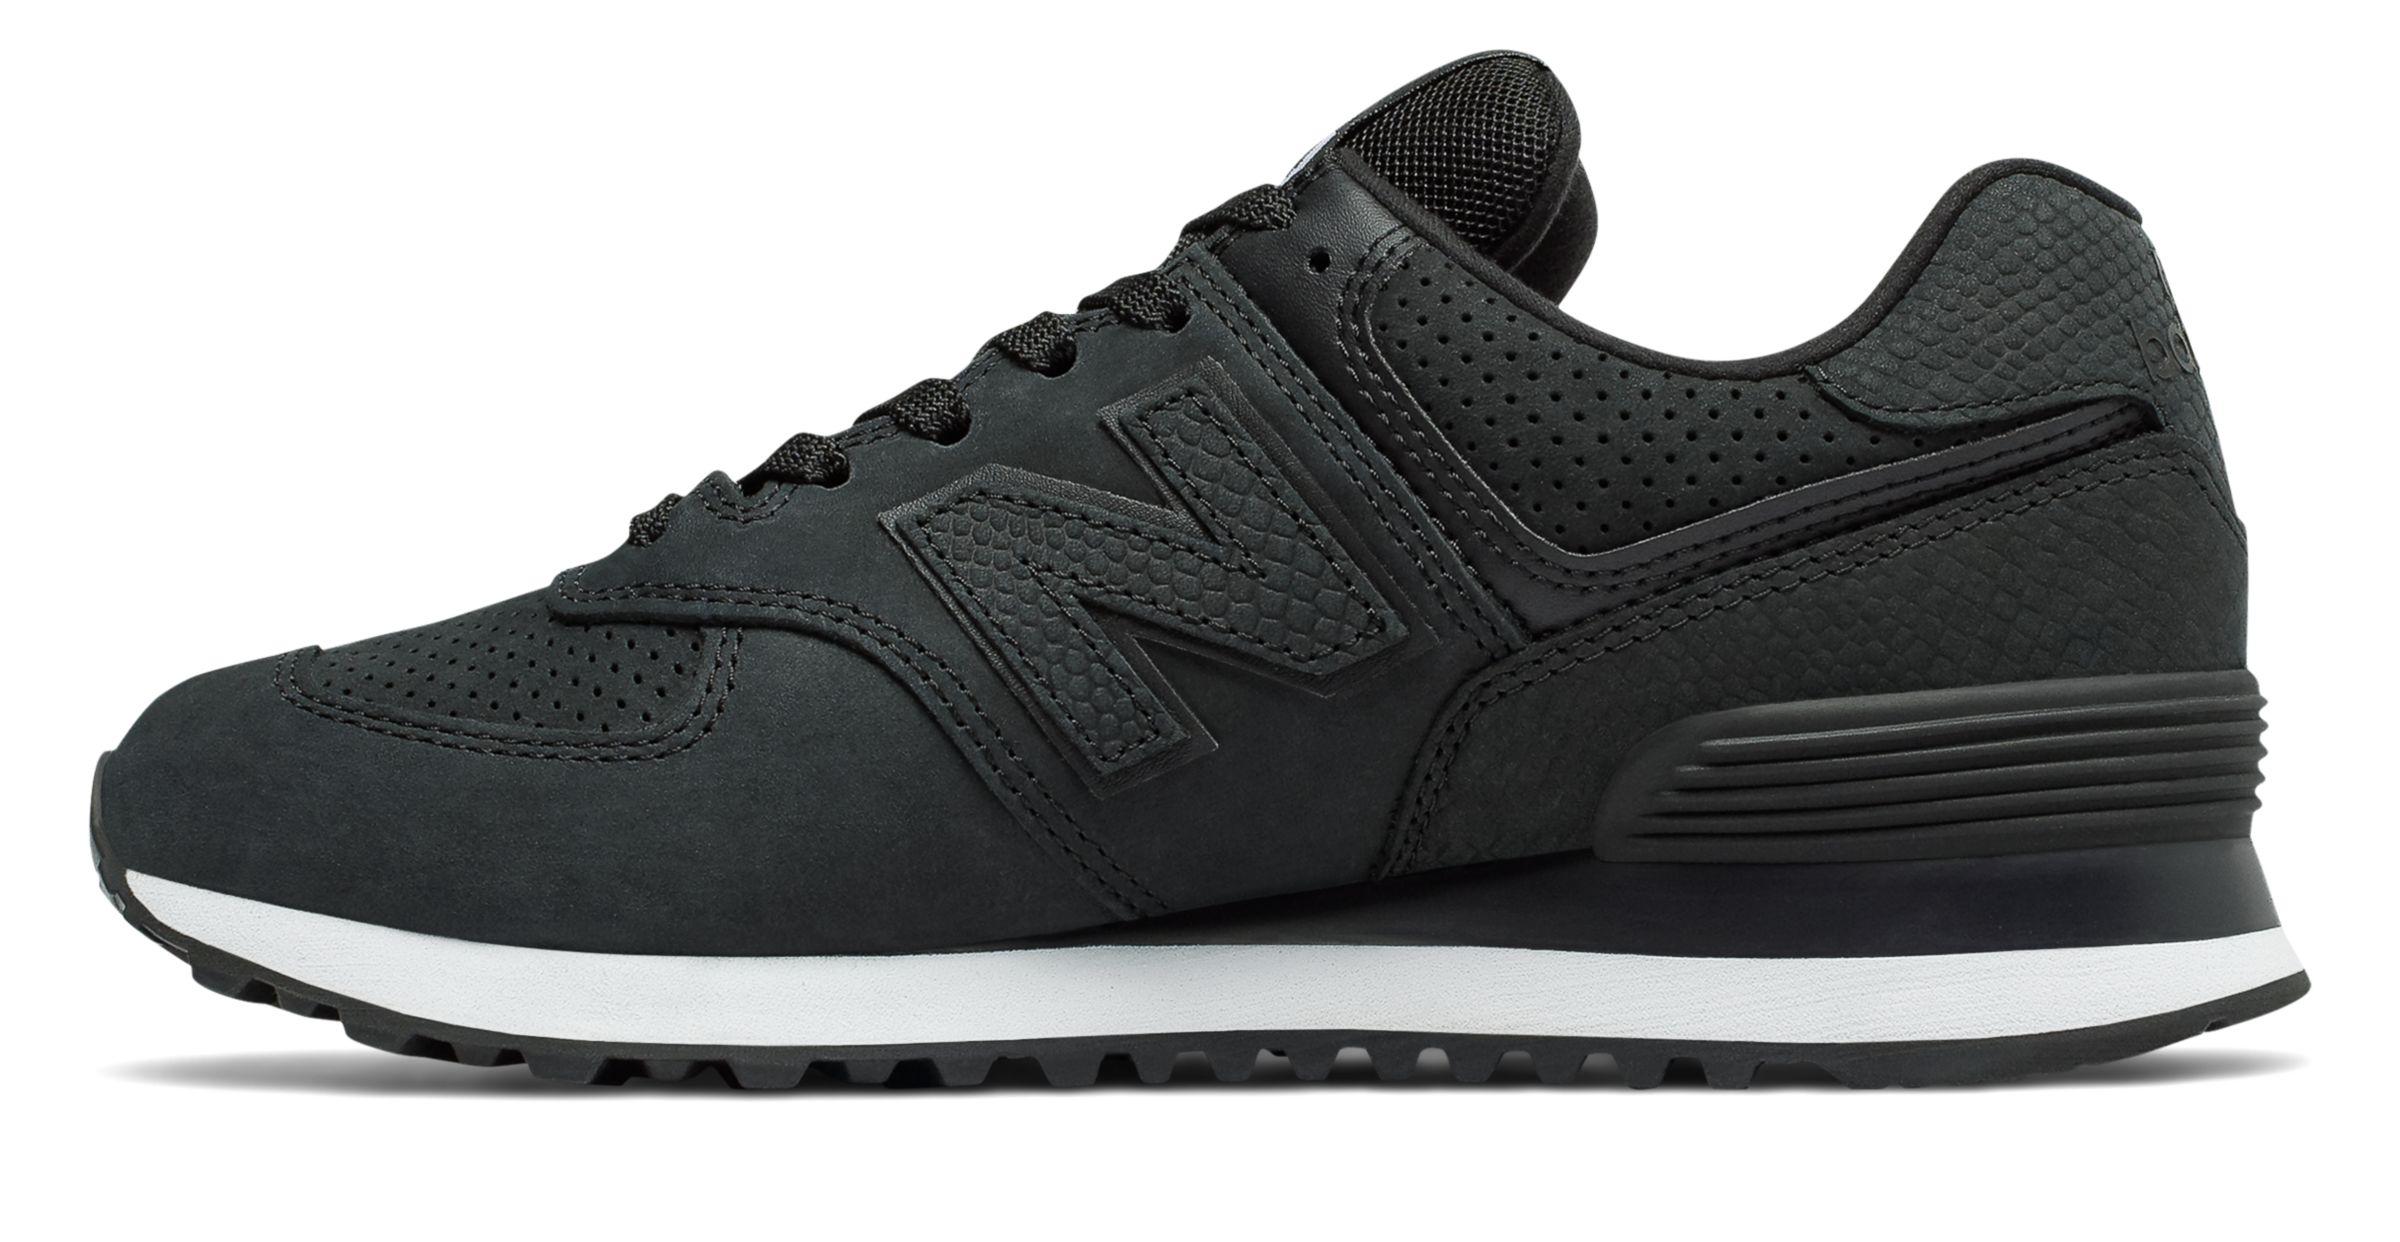 New Balance 574 Black And Brown : Lifestyle Hombre|Mujer | New Balance ...